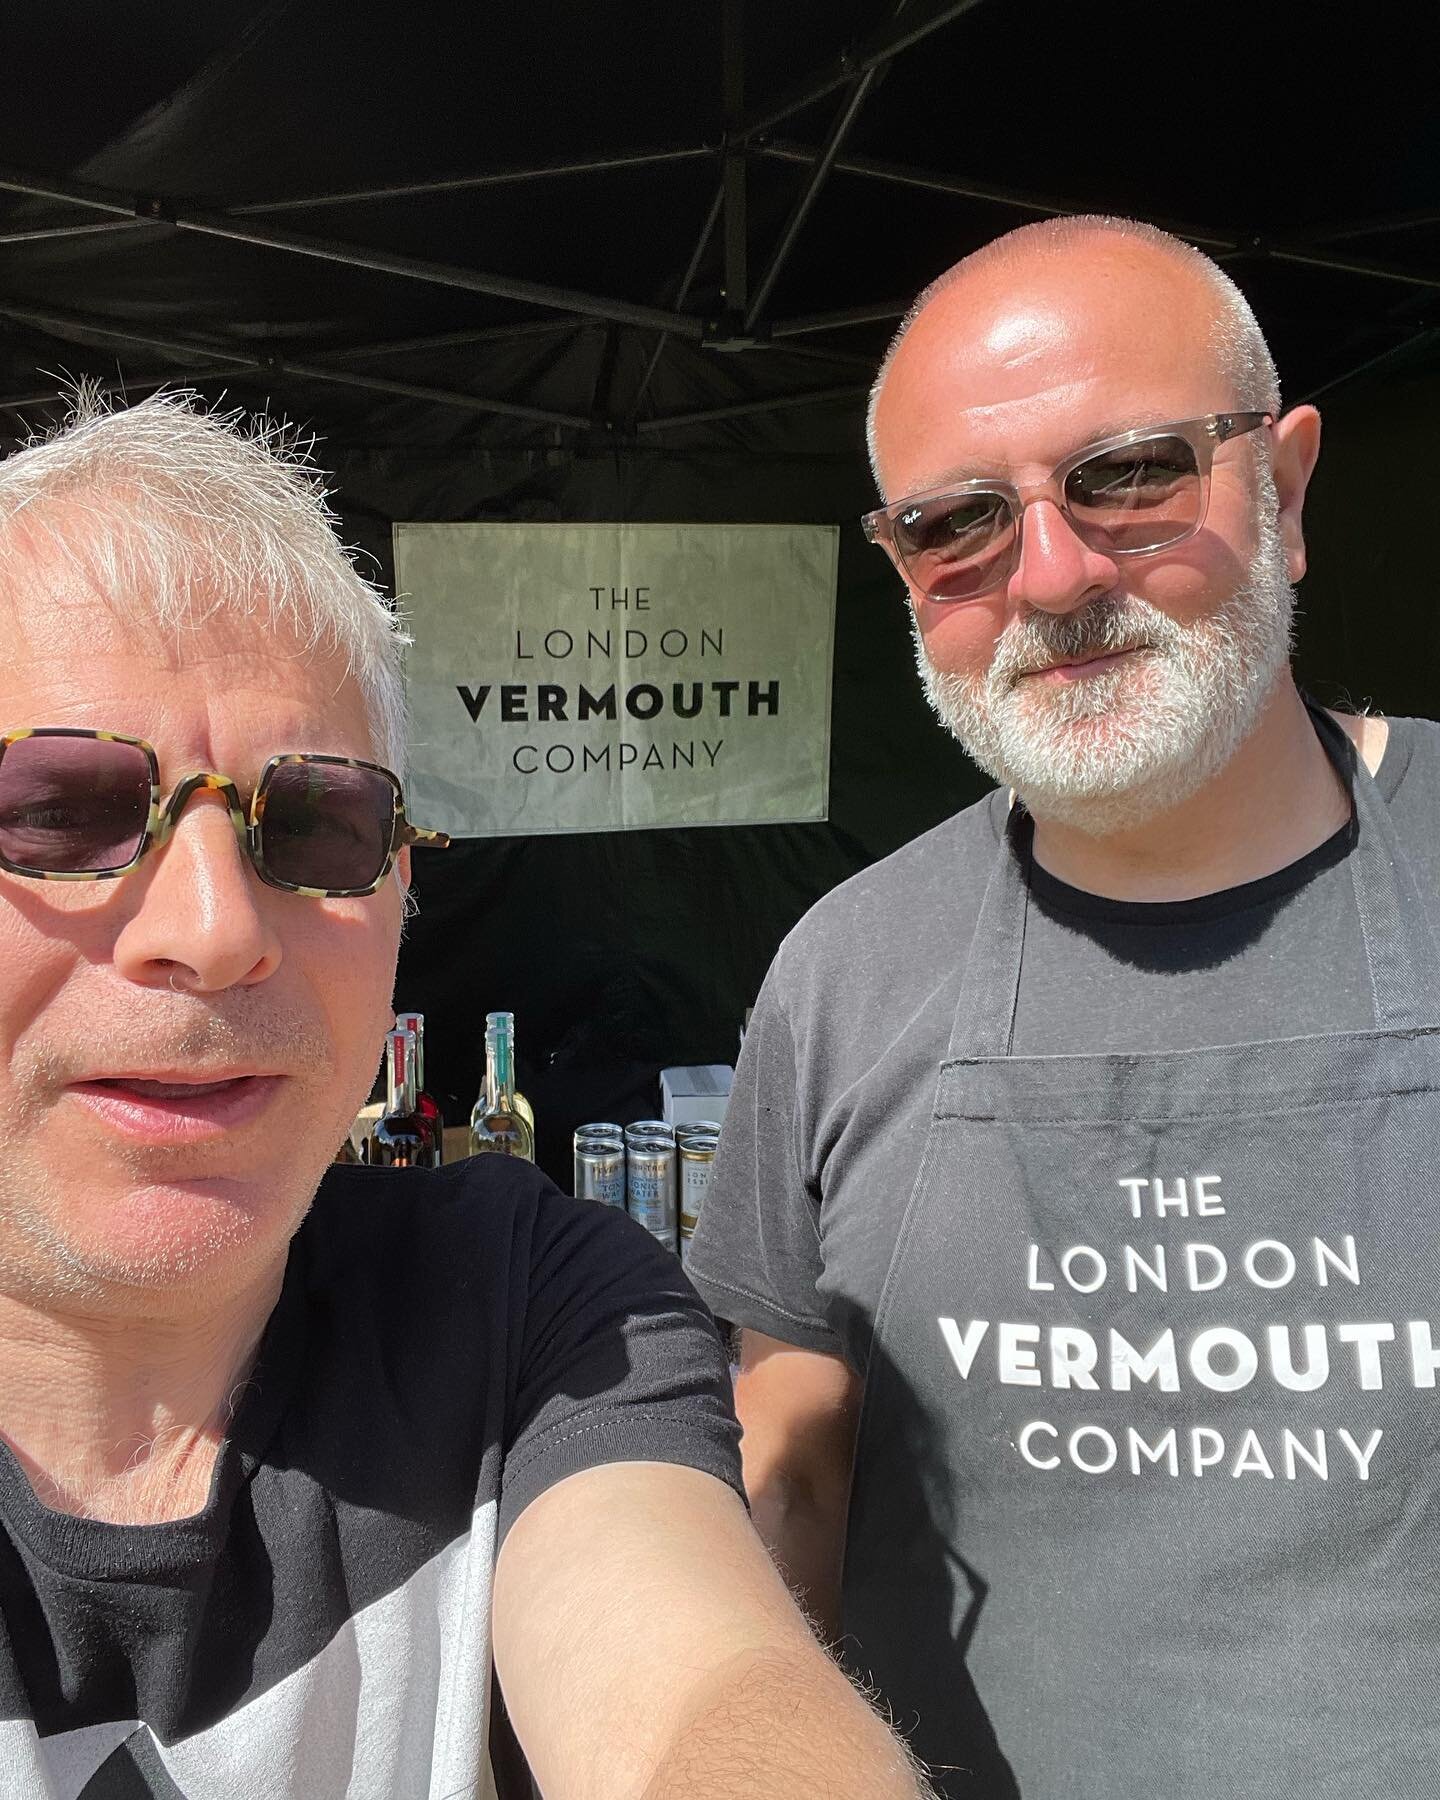 At Bristol foodie festival today - come visit us if are around! #foodiefestival #londonvermouth #londonvermouthcompany